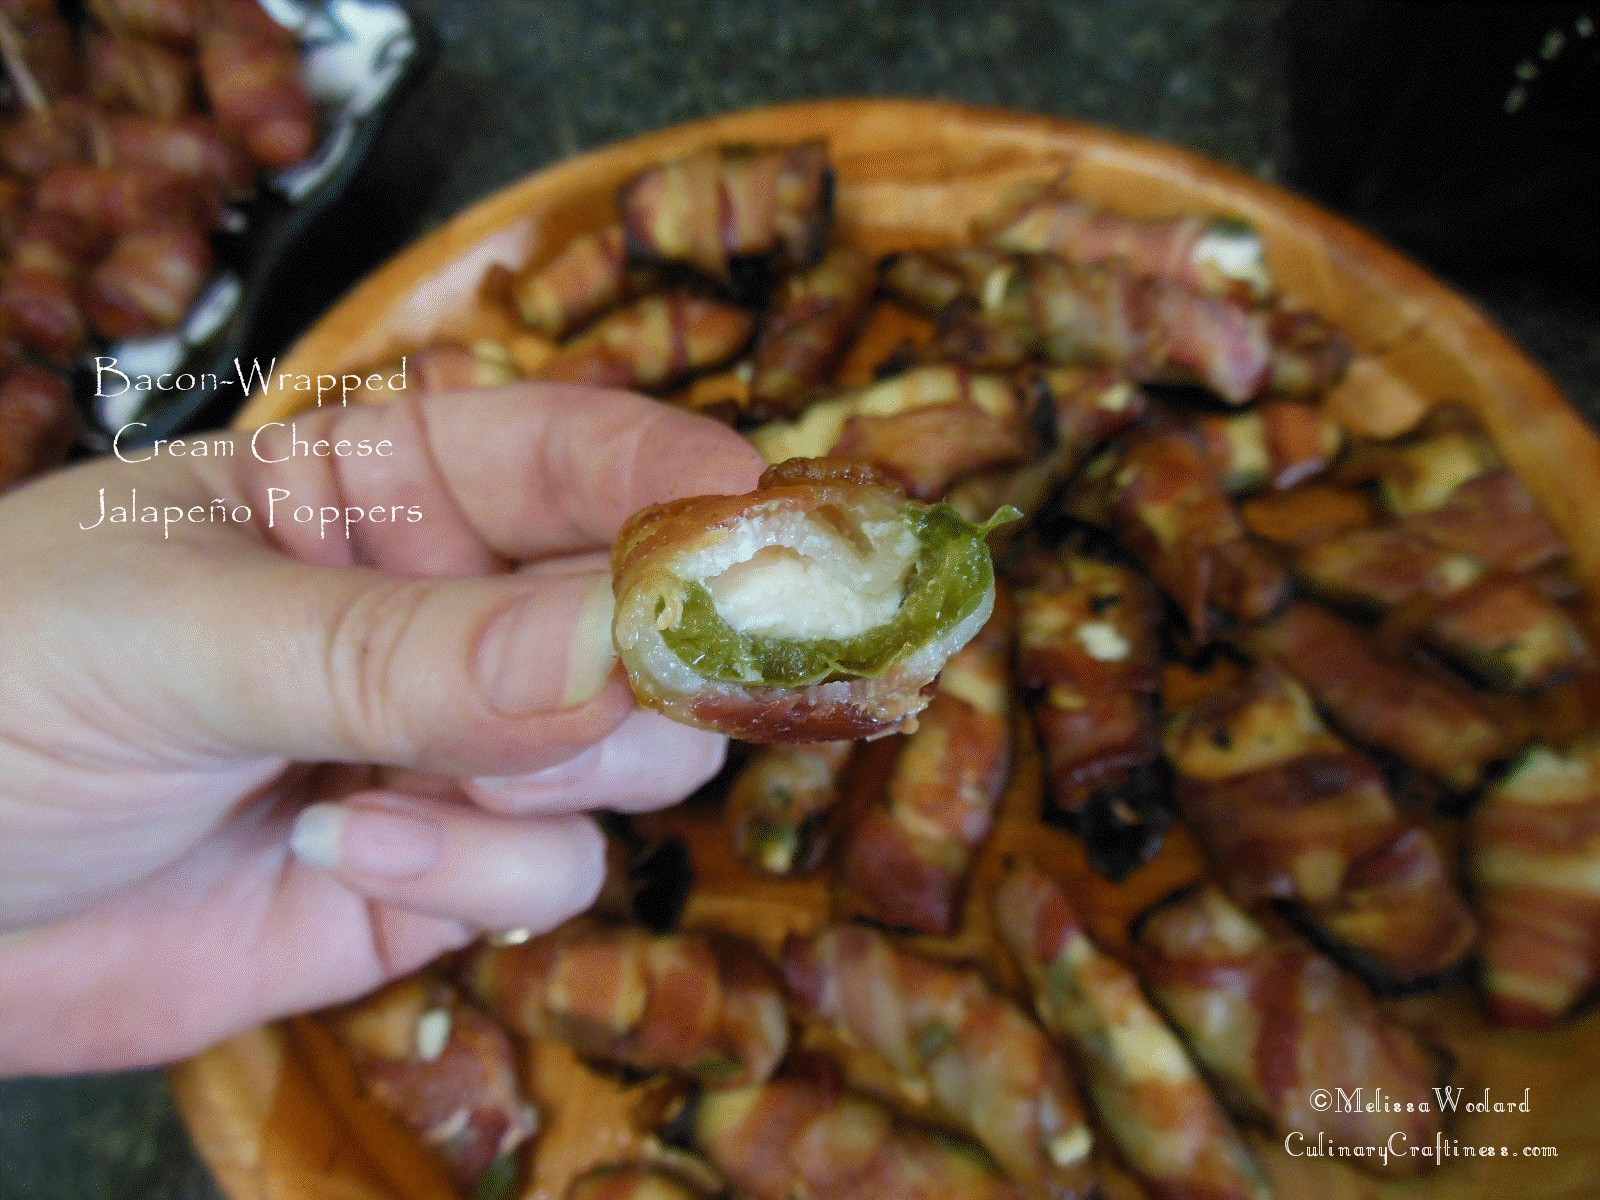 bacon-wrapped-cream-cheese-jalapeno-poppers-culinary-craftiness